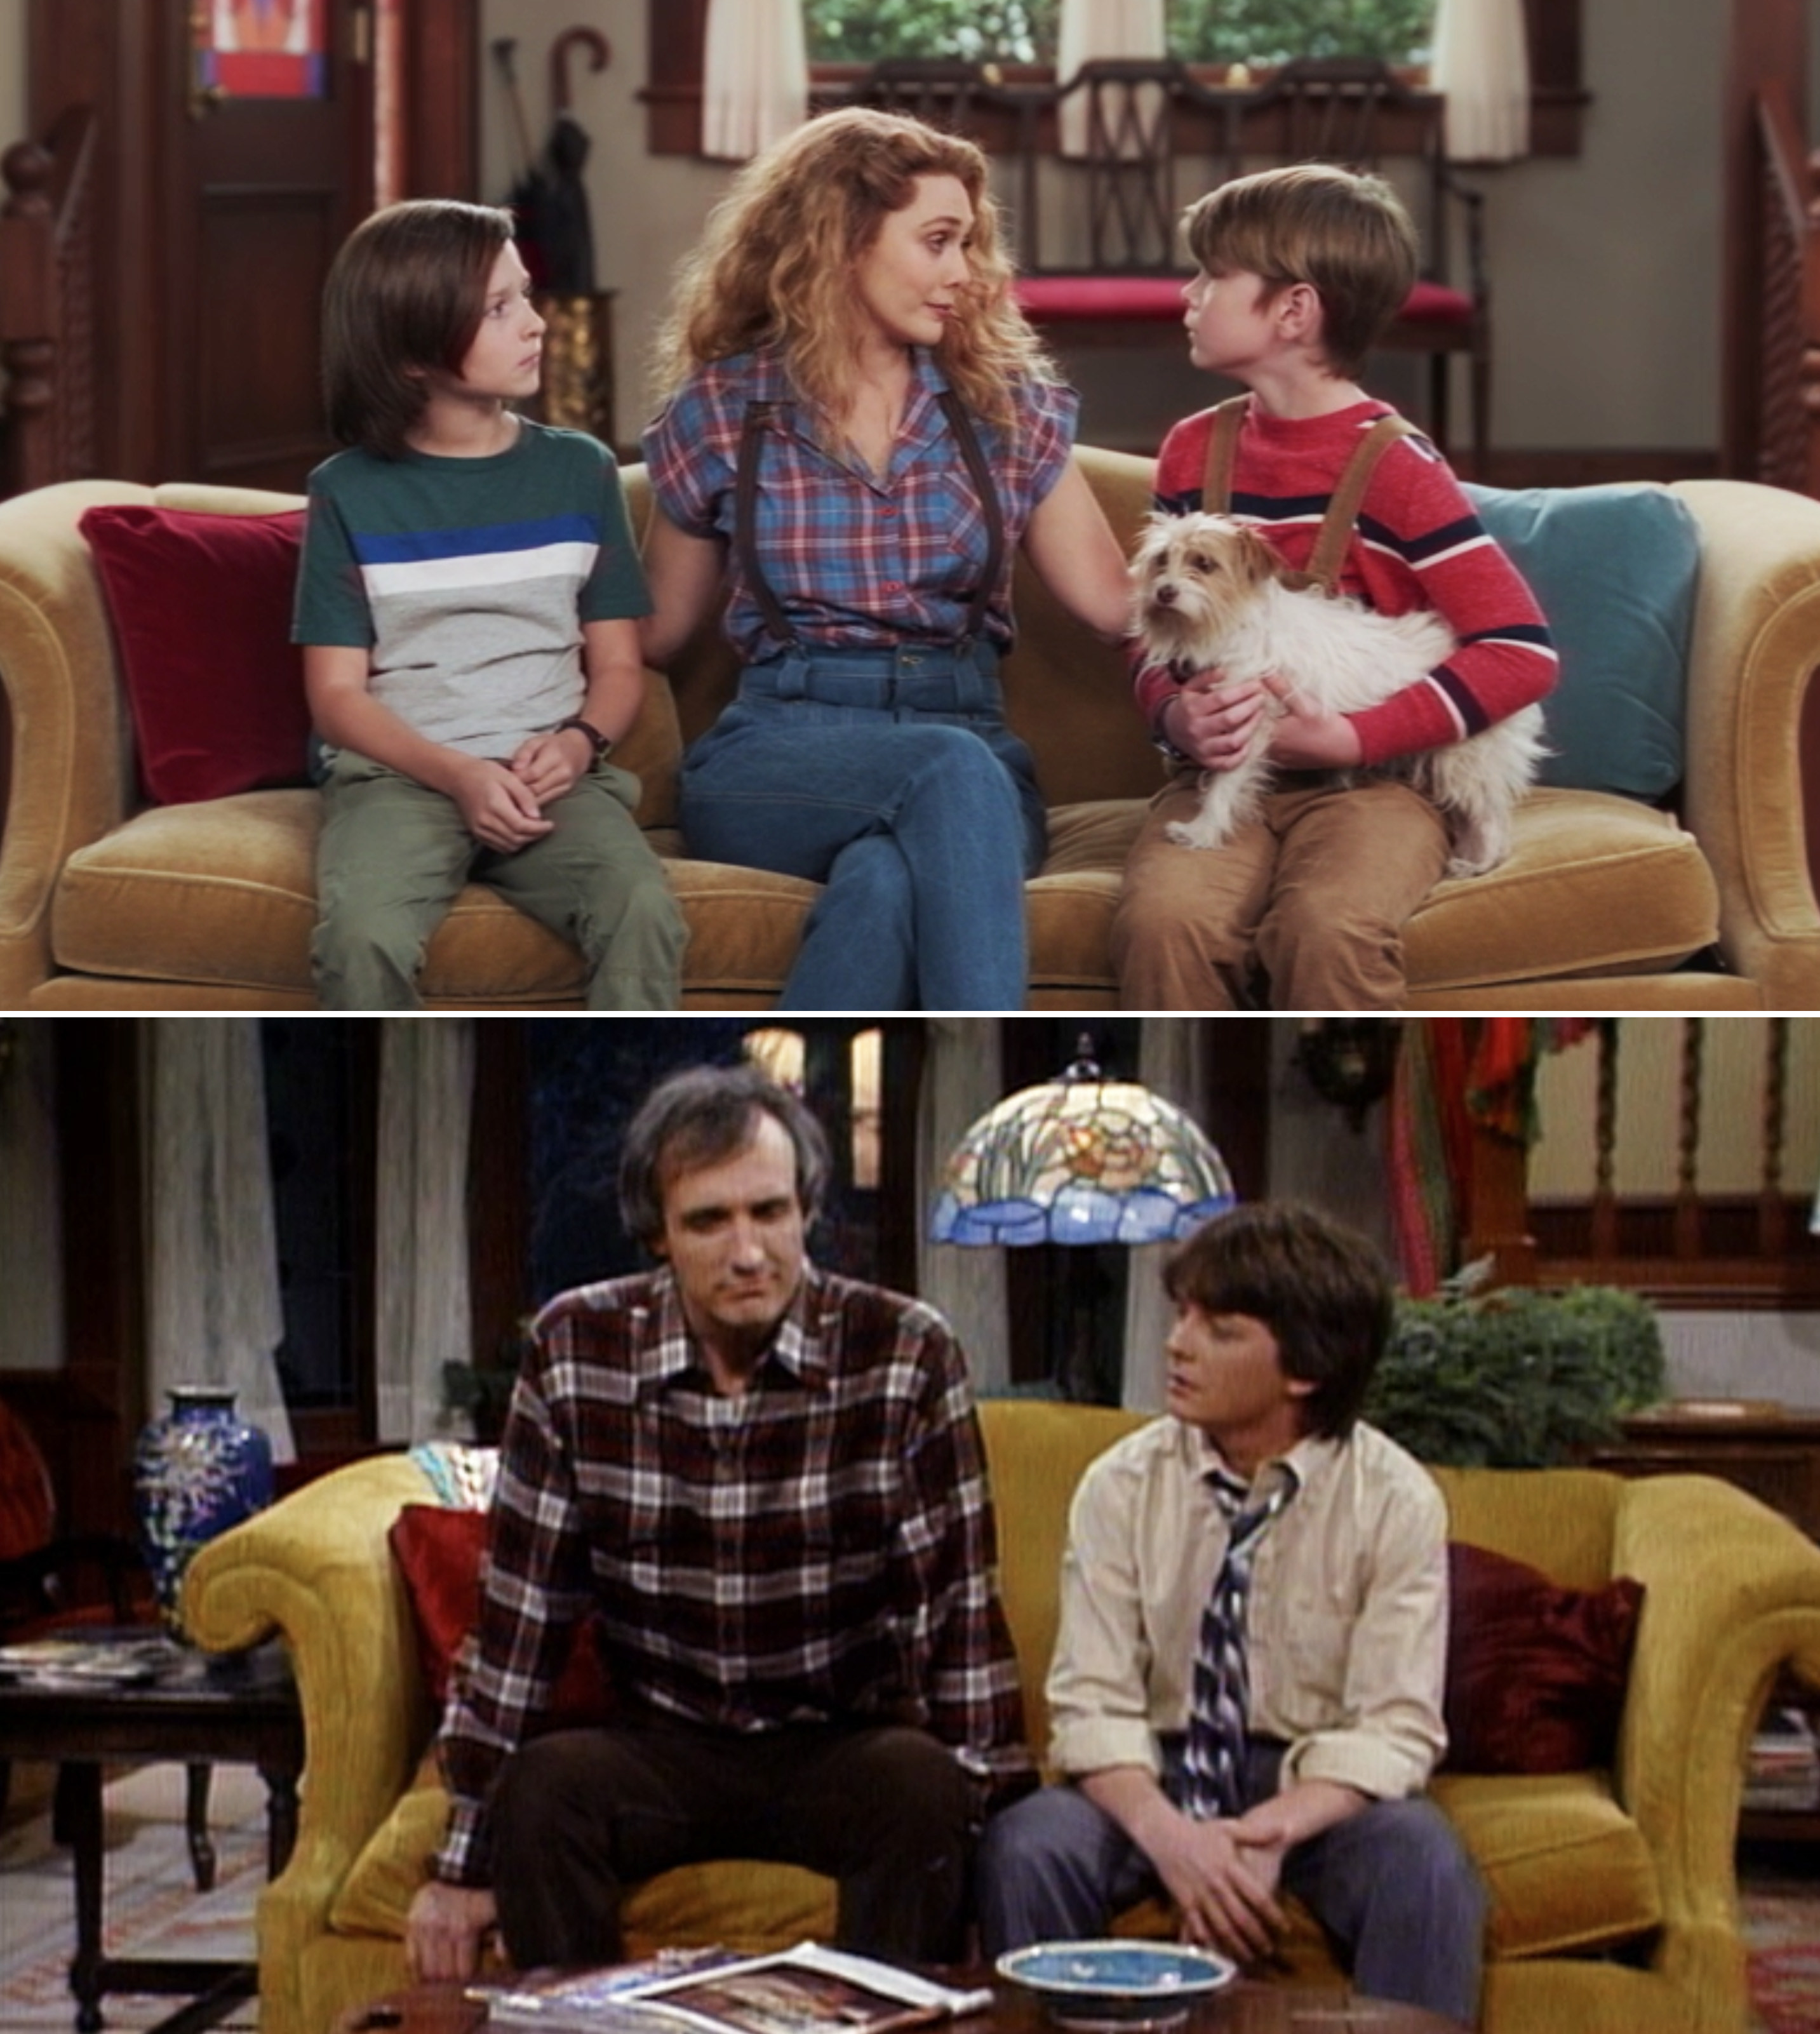 Wanda, Billy, and Tommy sitting on the couch with Sparky vs. Steven talking to Alex on the couch in &quot;Family Ties&quot;